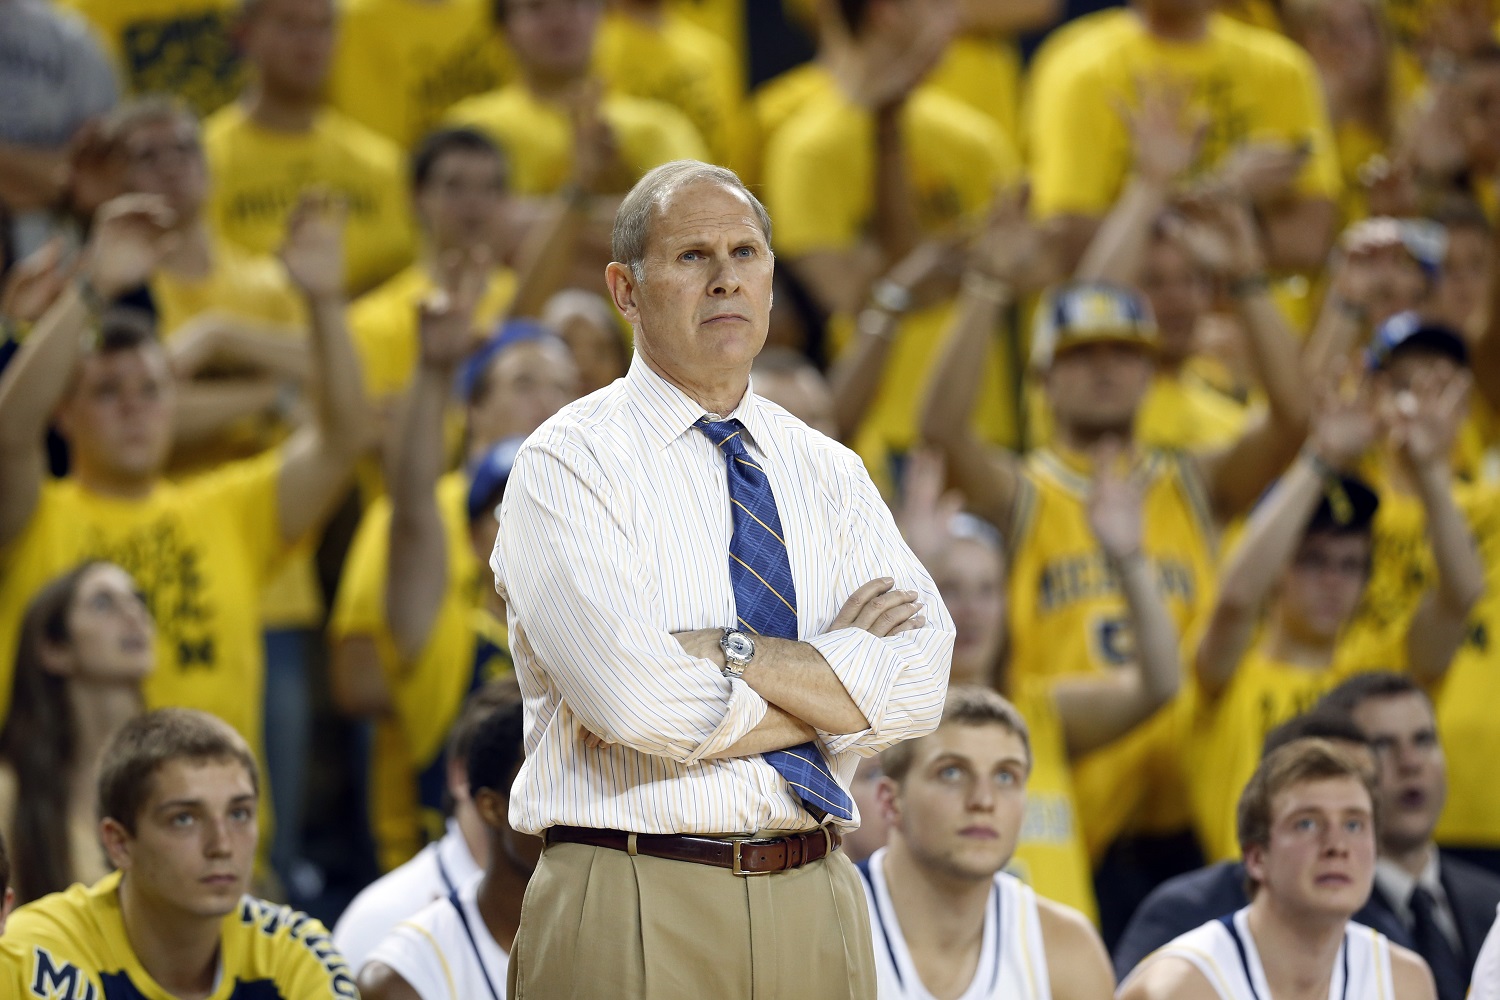 Michigan Wolverines head coach John Beilein watches against Wayne State in the second half of an exhibition NCAA basketball game in Ann Arbor, Mich., Monday, Nov. 4, 2013. (AP Photo/Paul Sancya)